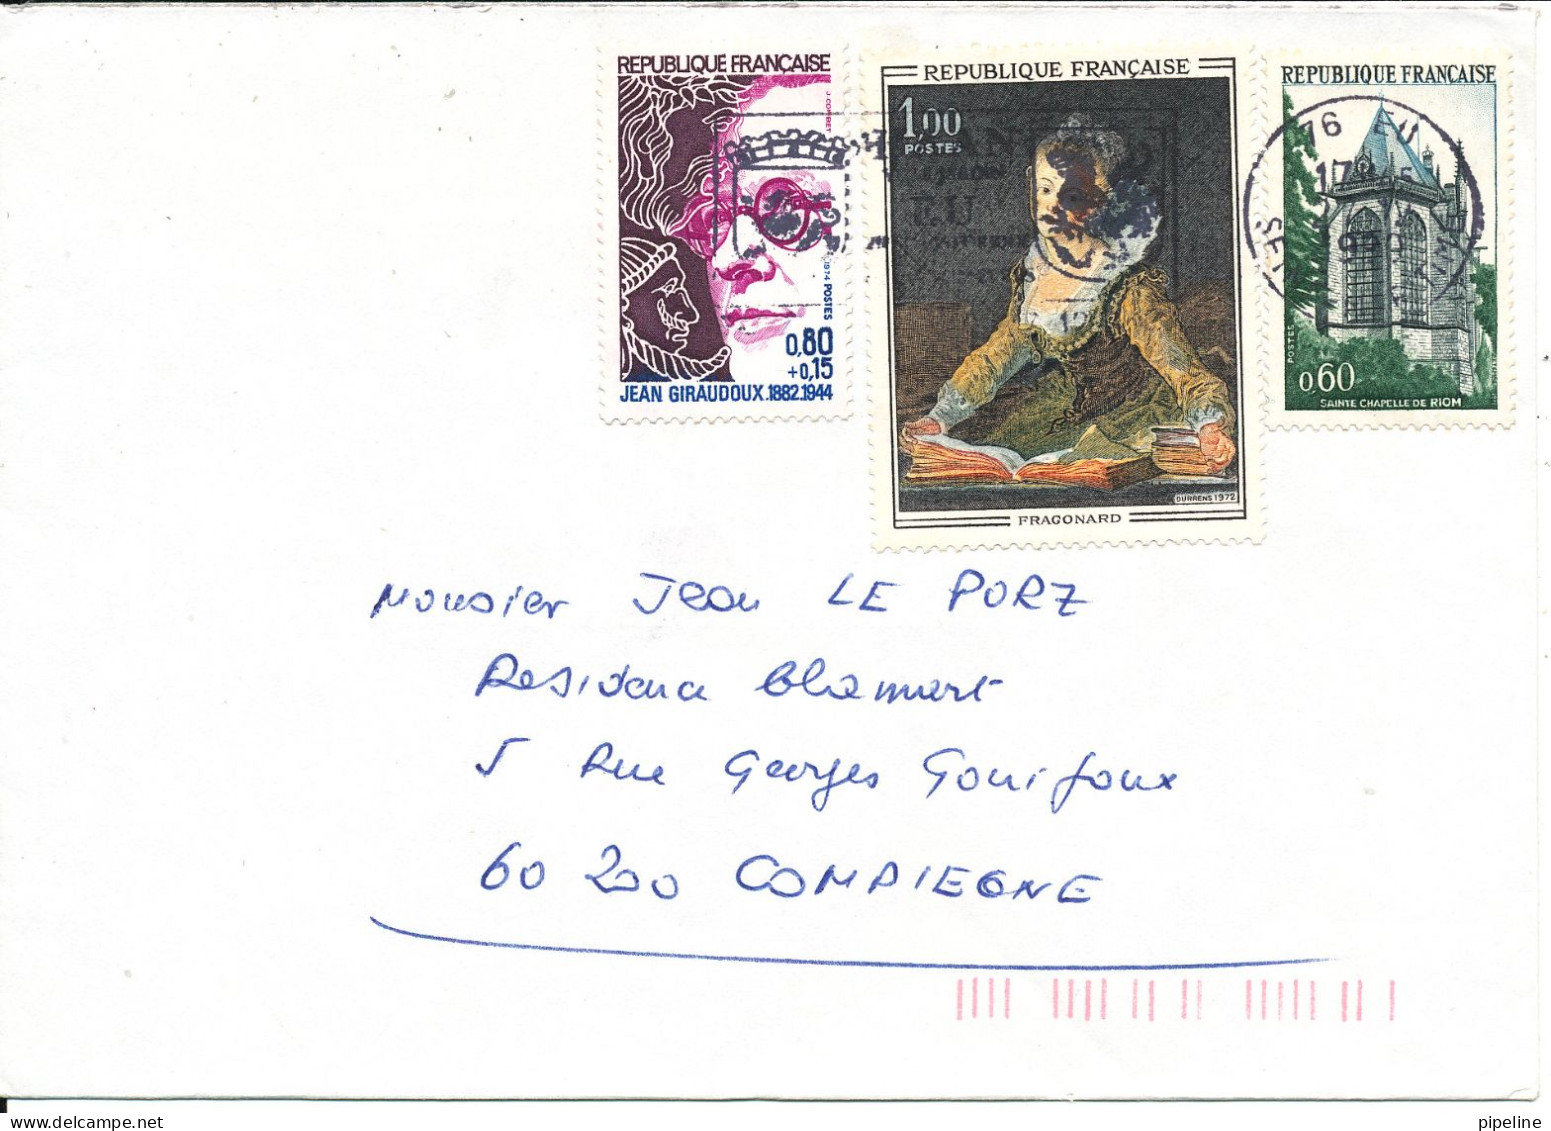 France Cover 27-12-1989 - Covers & Documents